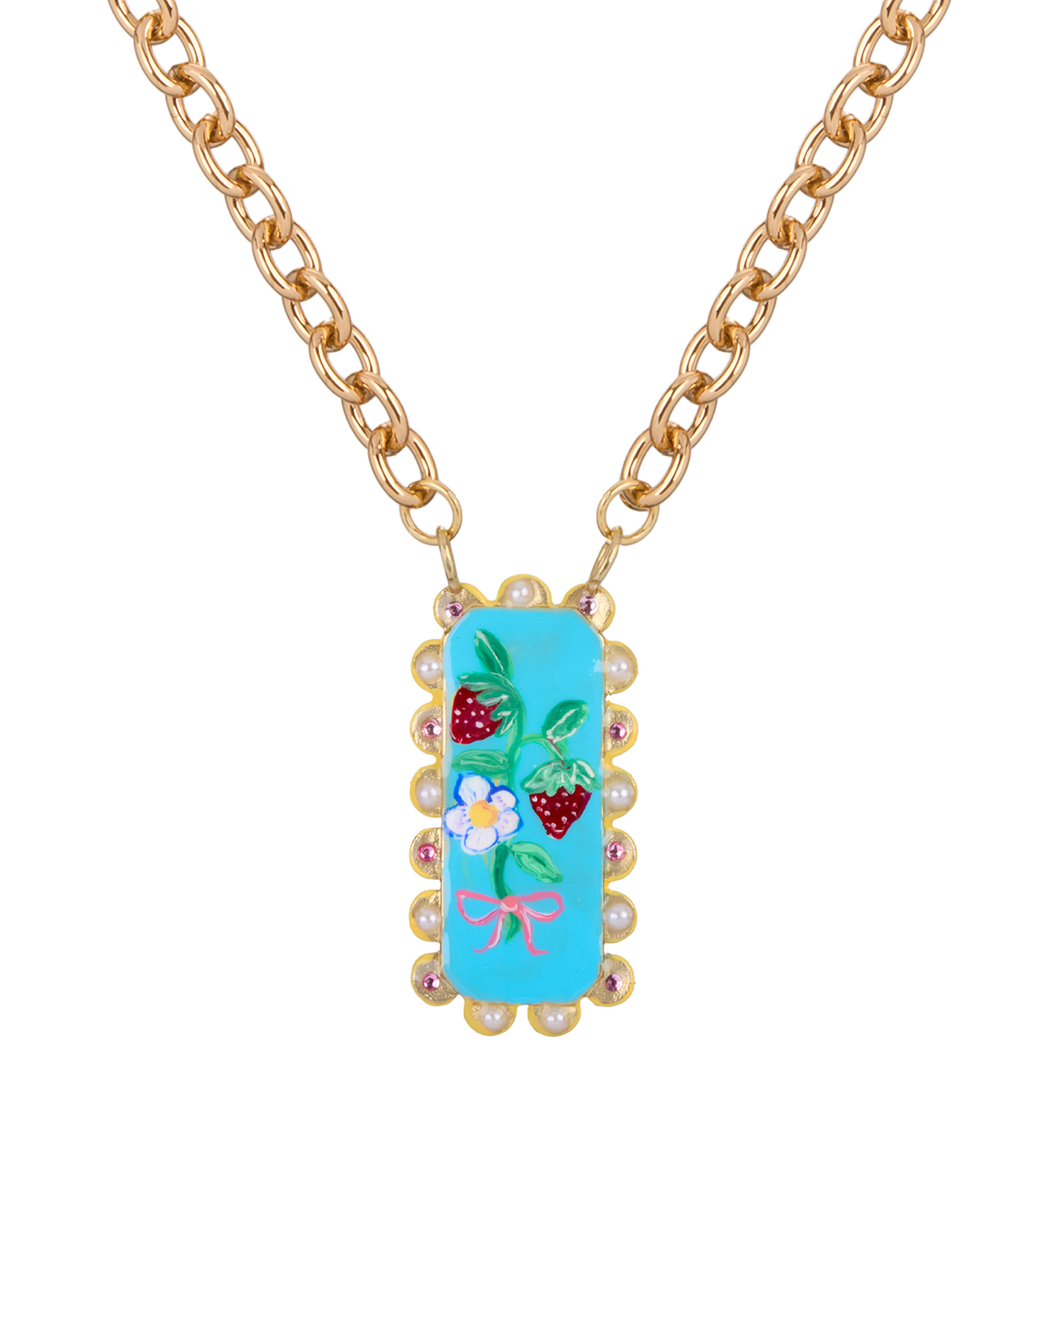 Scallopine Necklace